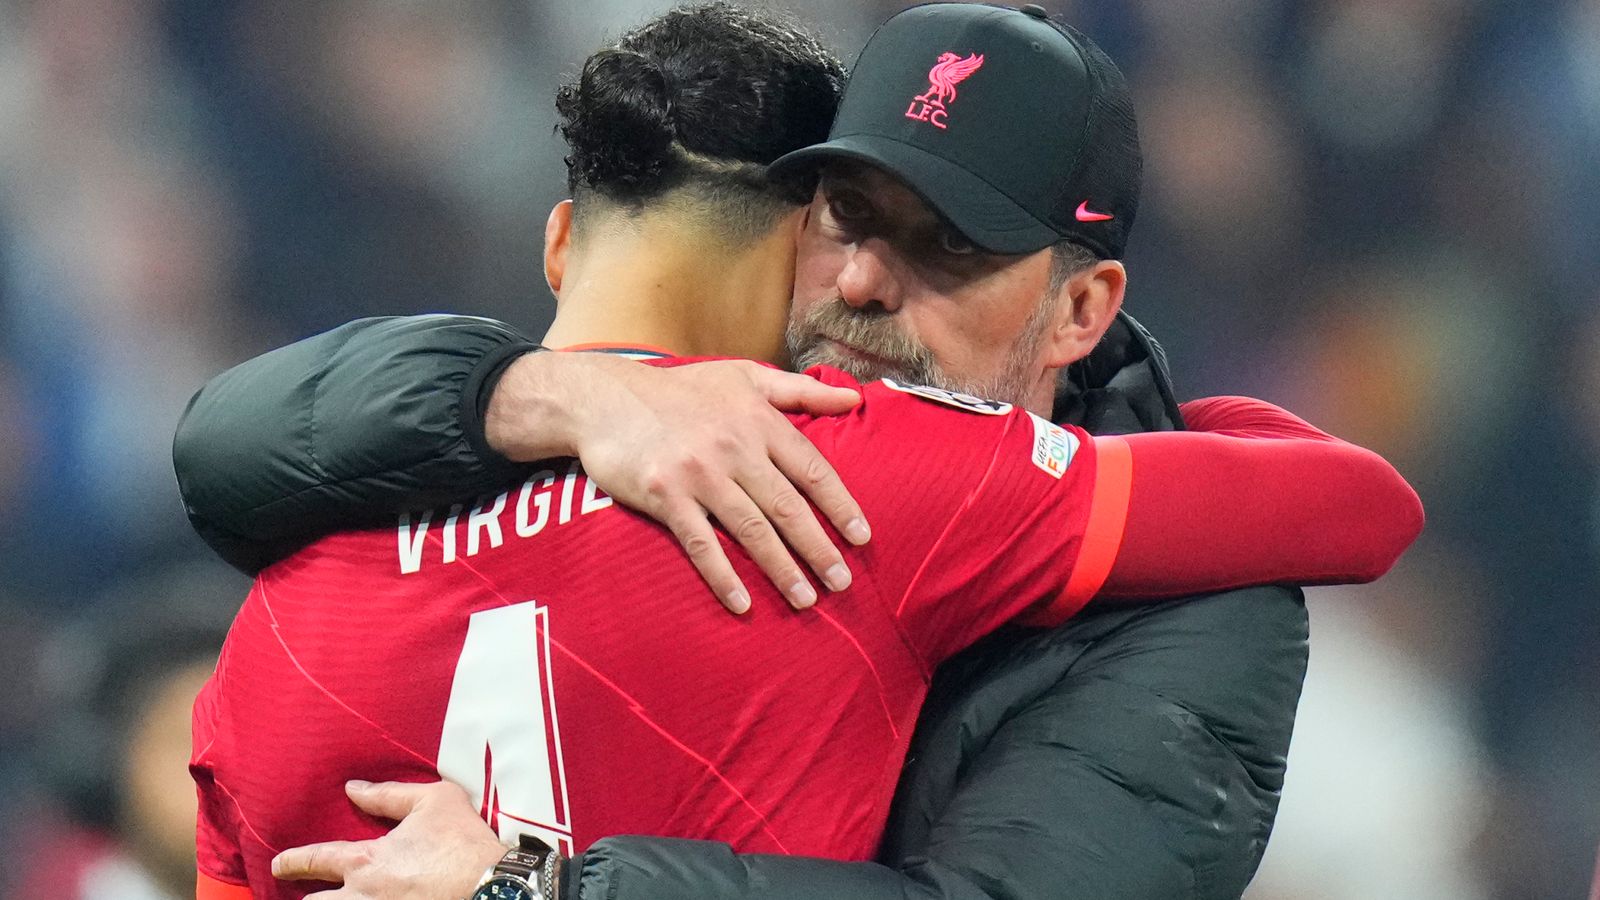 Jurgen Klopp confident Liverpool will come again: 'Book your hotels for next year's Champions League final'